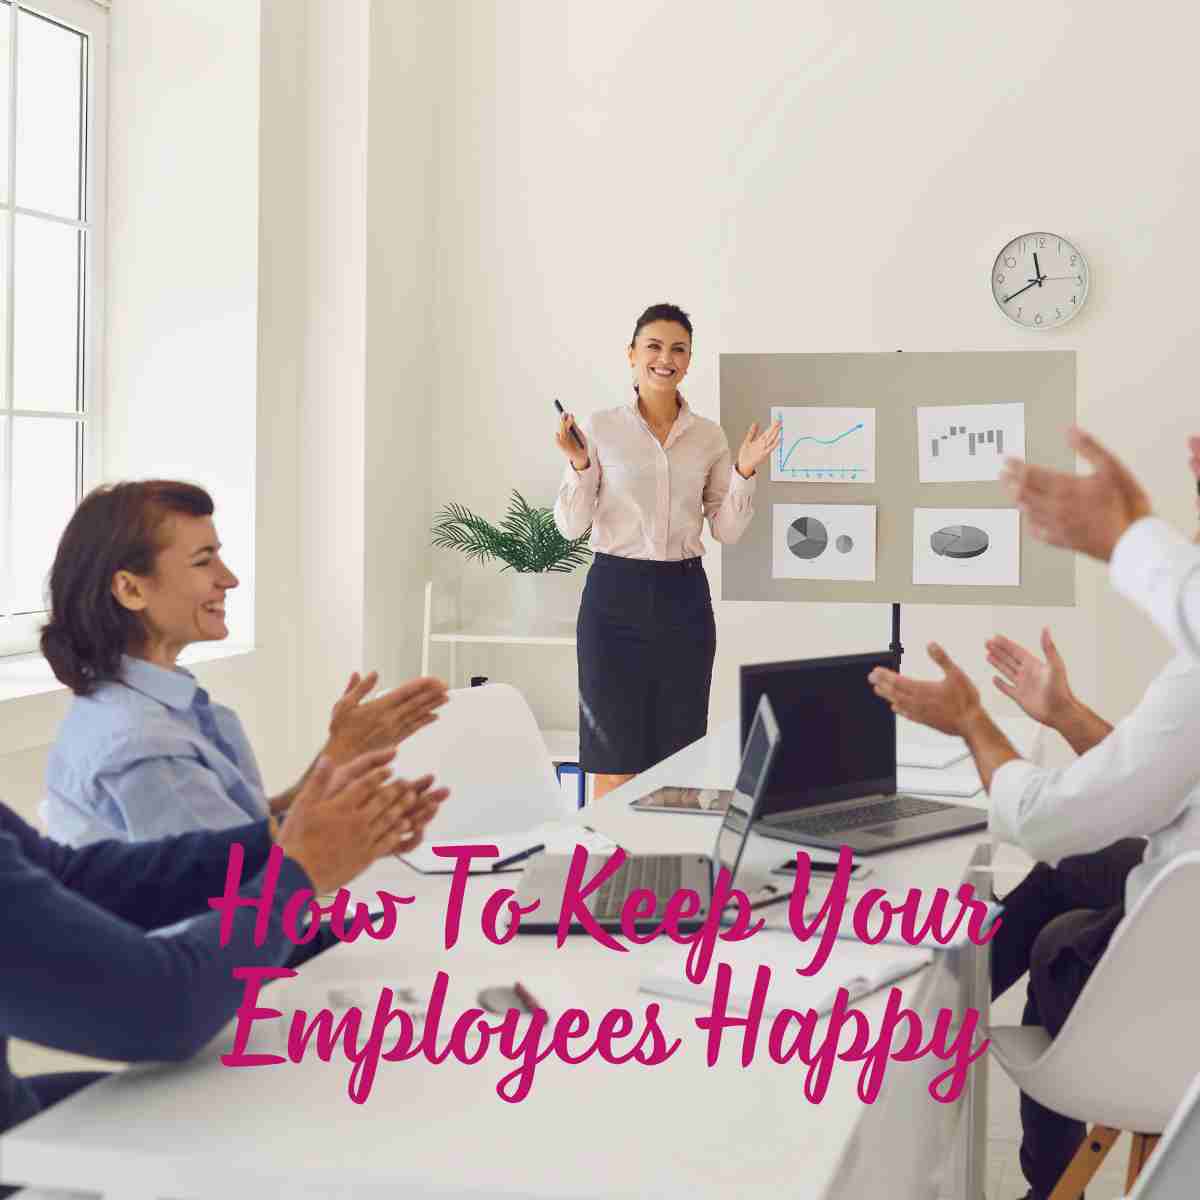 How To Keep Your Employees Happy